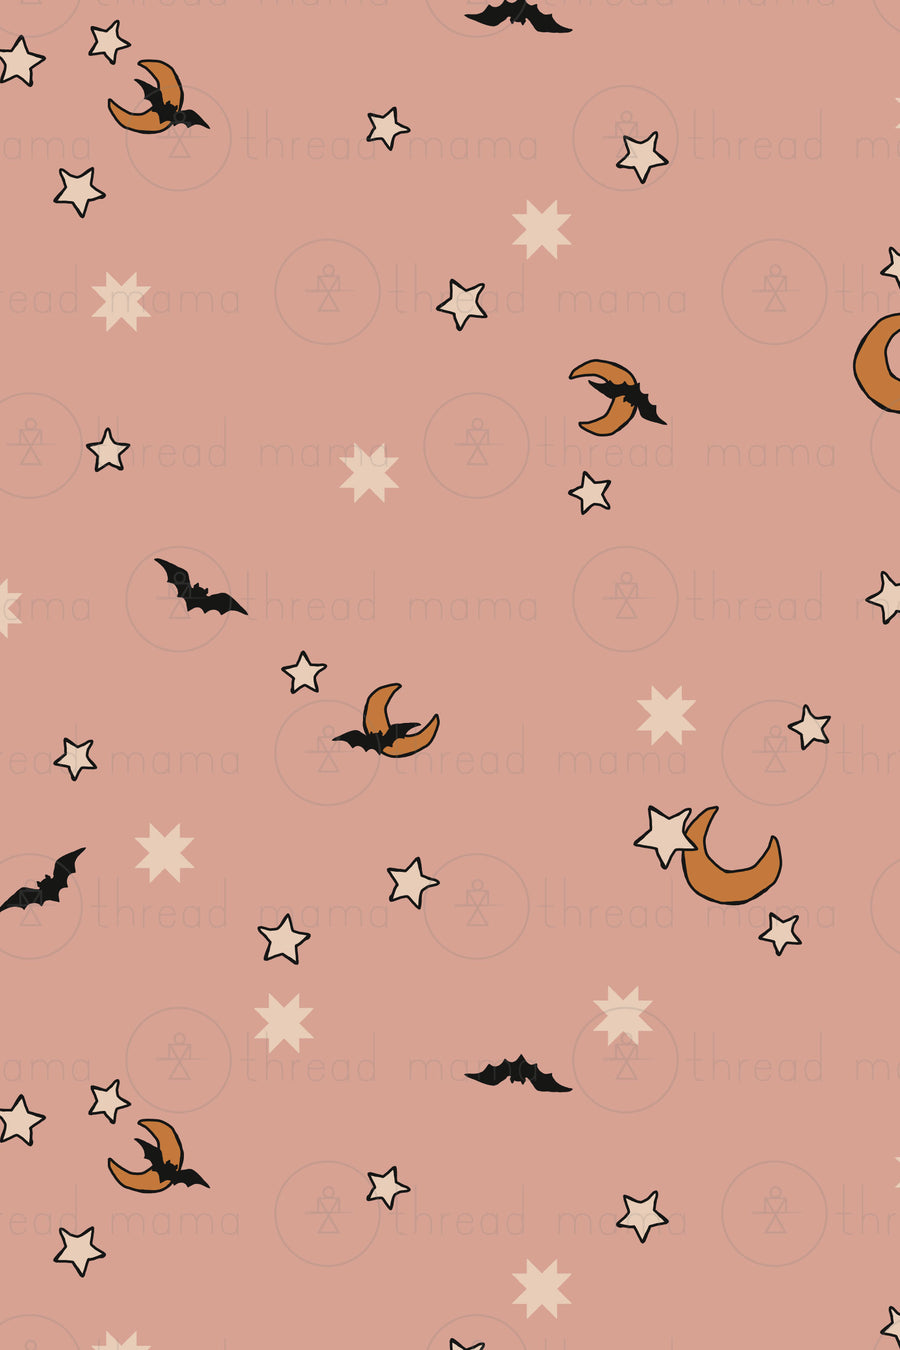 Repeating Pattern 225 (Seamless)